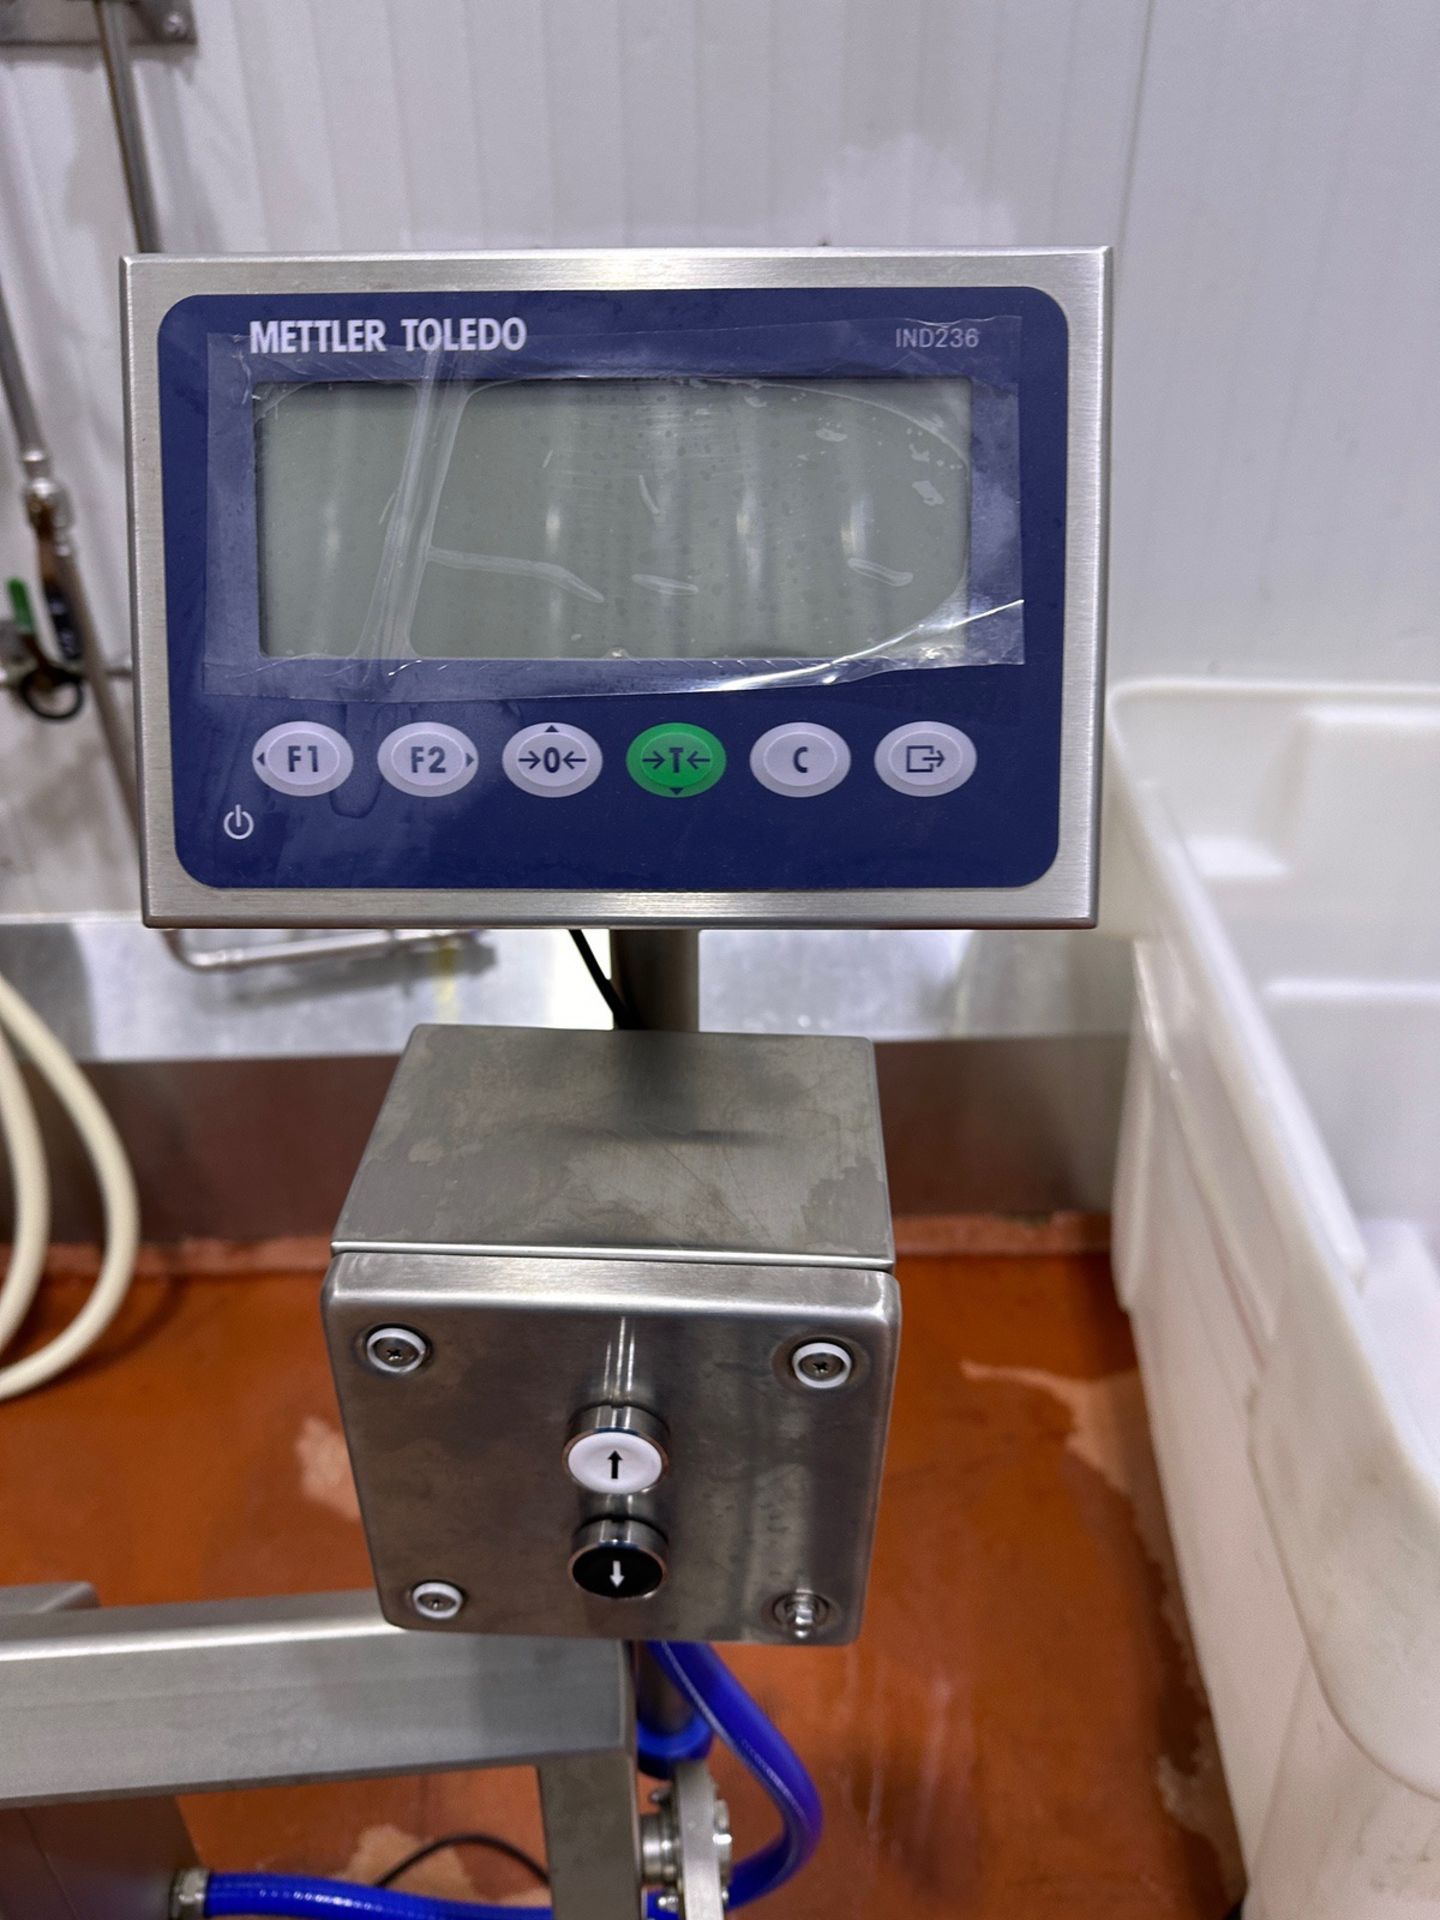 2018 Mettler Toledo Sypal 770 LB Buggy Scale, Model WS3-1000-USA, S/N 25060-7 | Rig Fee $150 - Image 3 of 6